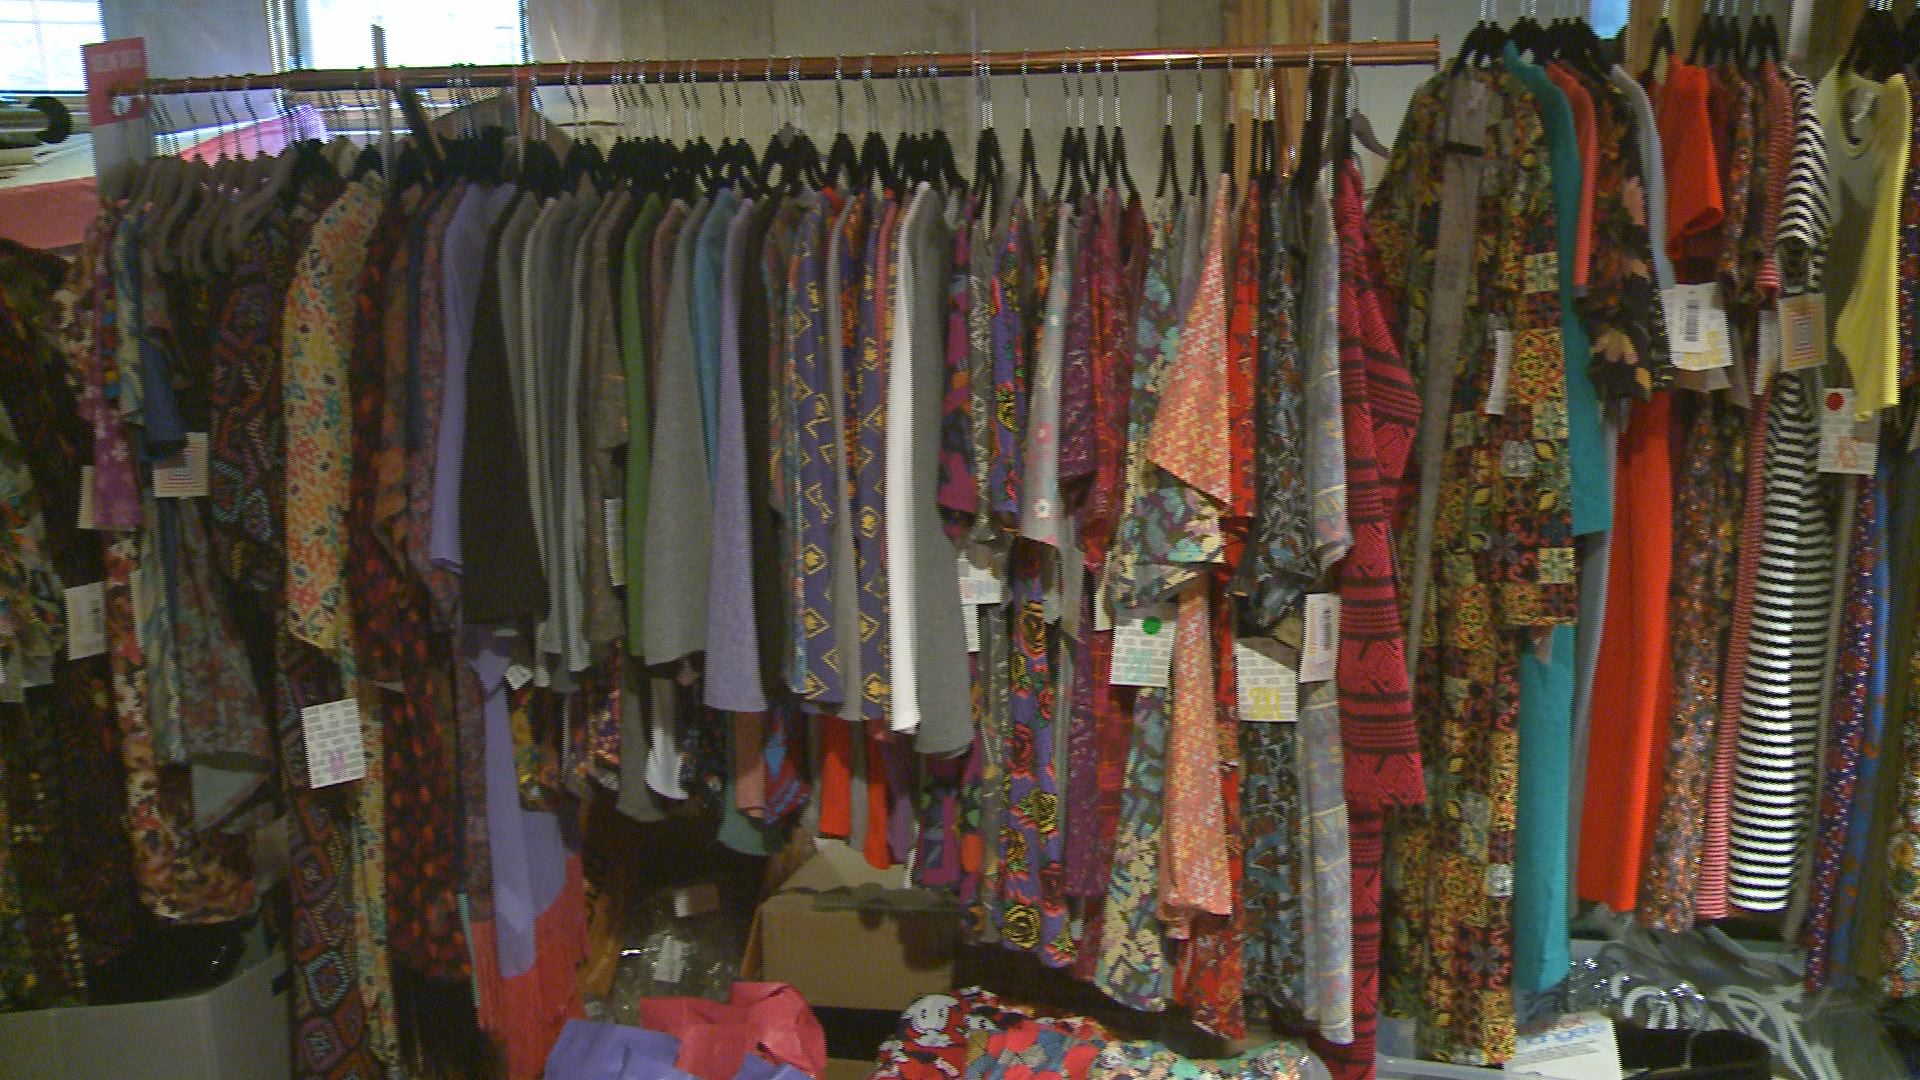 They bought into LuLaRoe to make money, now they're leaving in debt